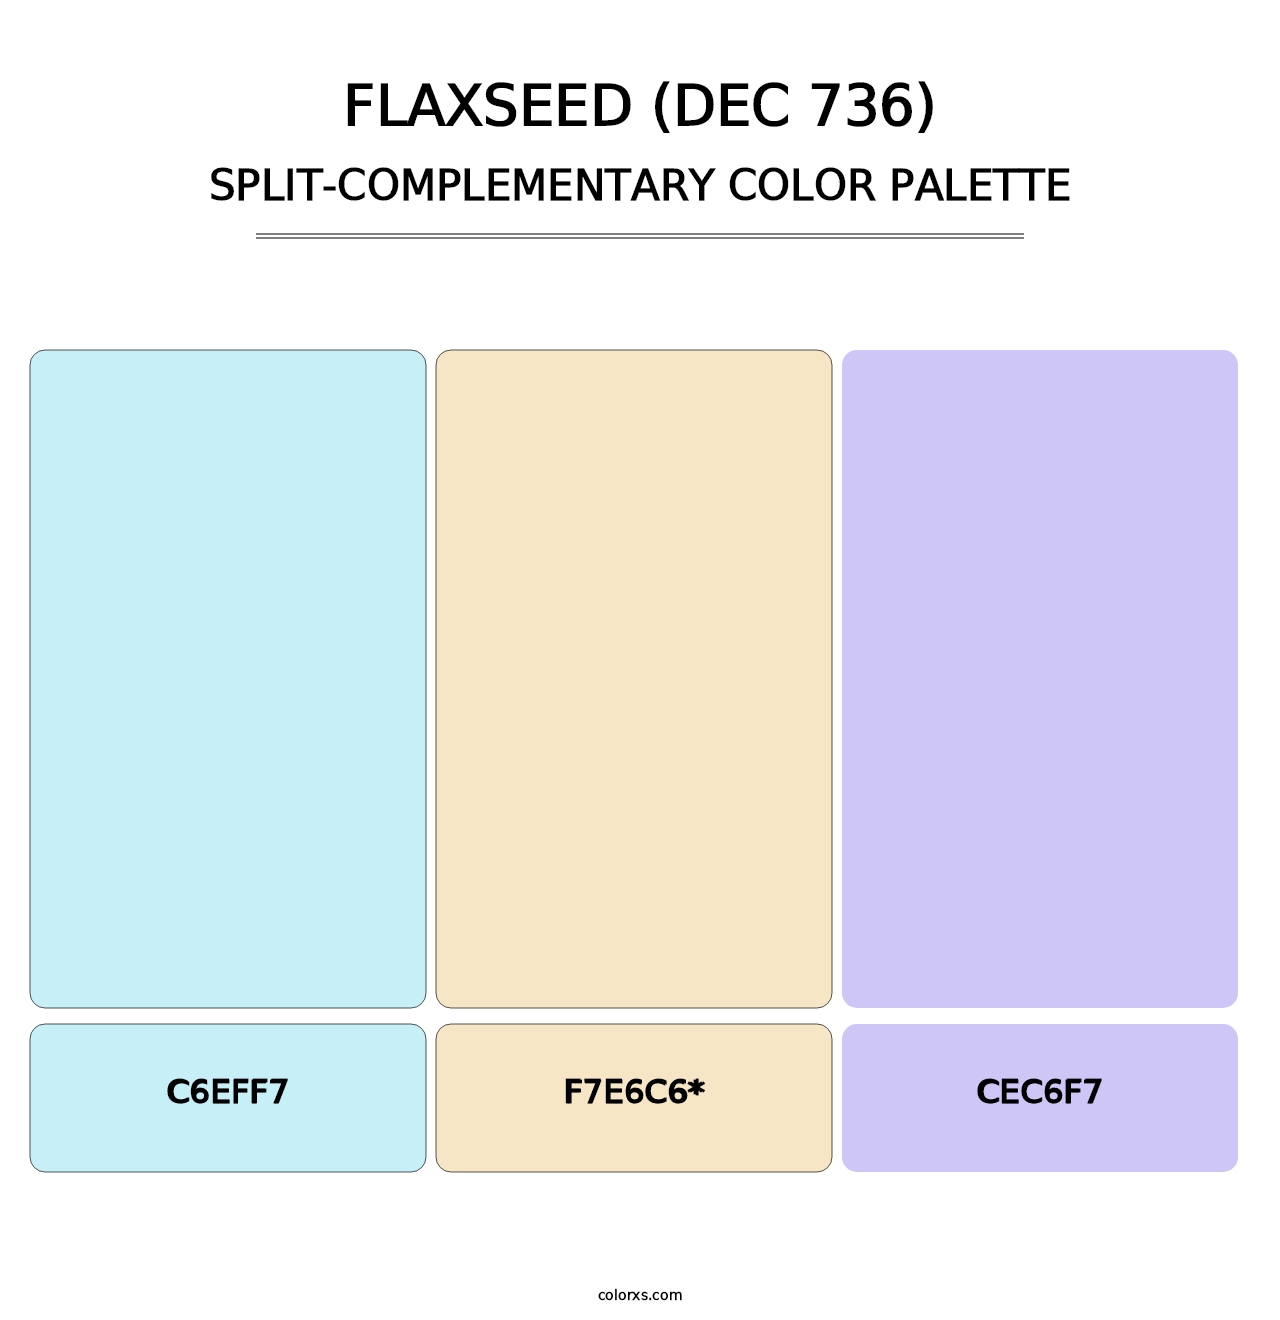 Flaxseed (DEC 736) - Split-Complementary Color Palette